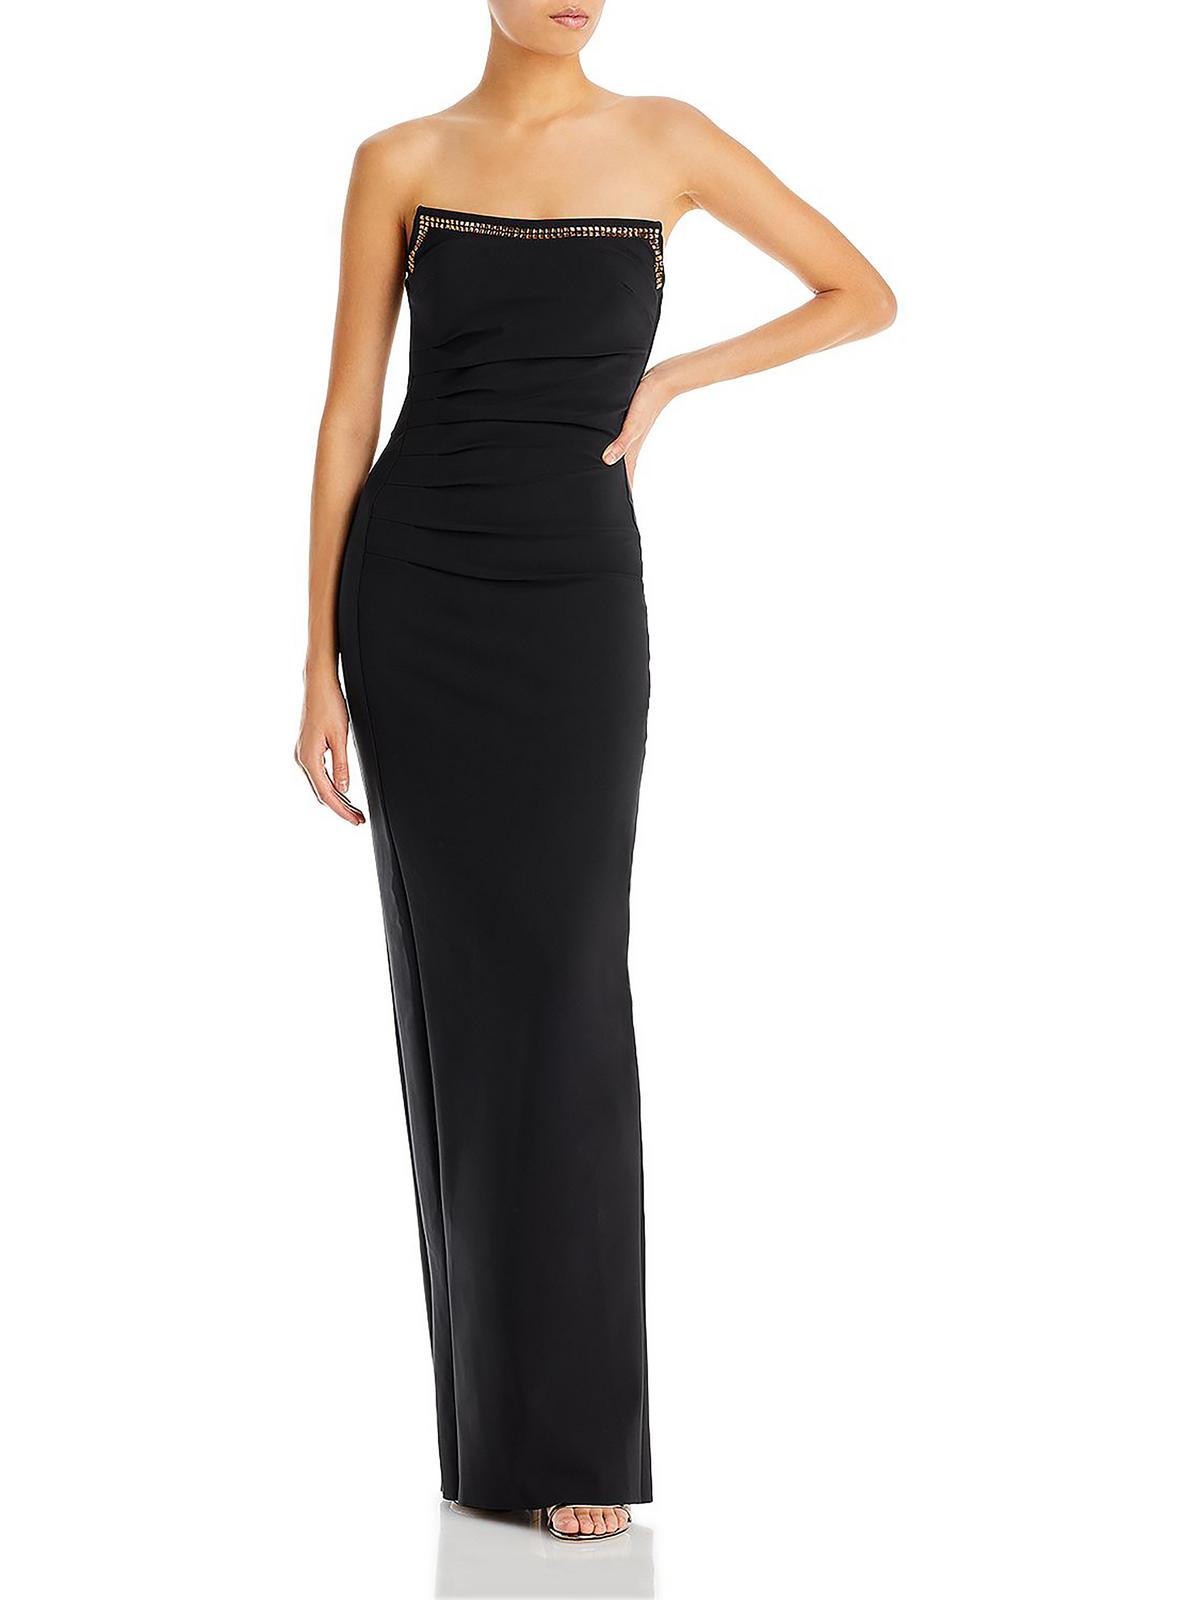 Chiara Boni Everly Womens Embellished Strapless Cocktail And Party Dress In Black